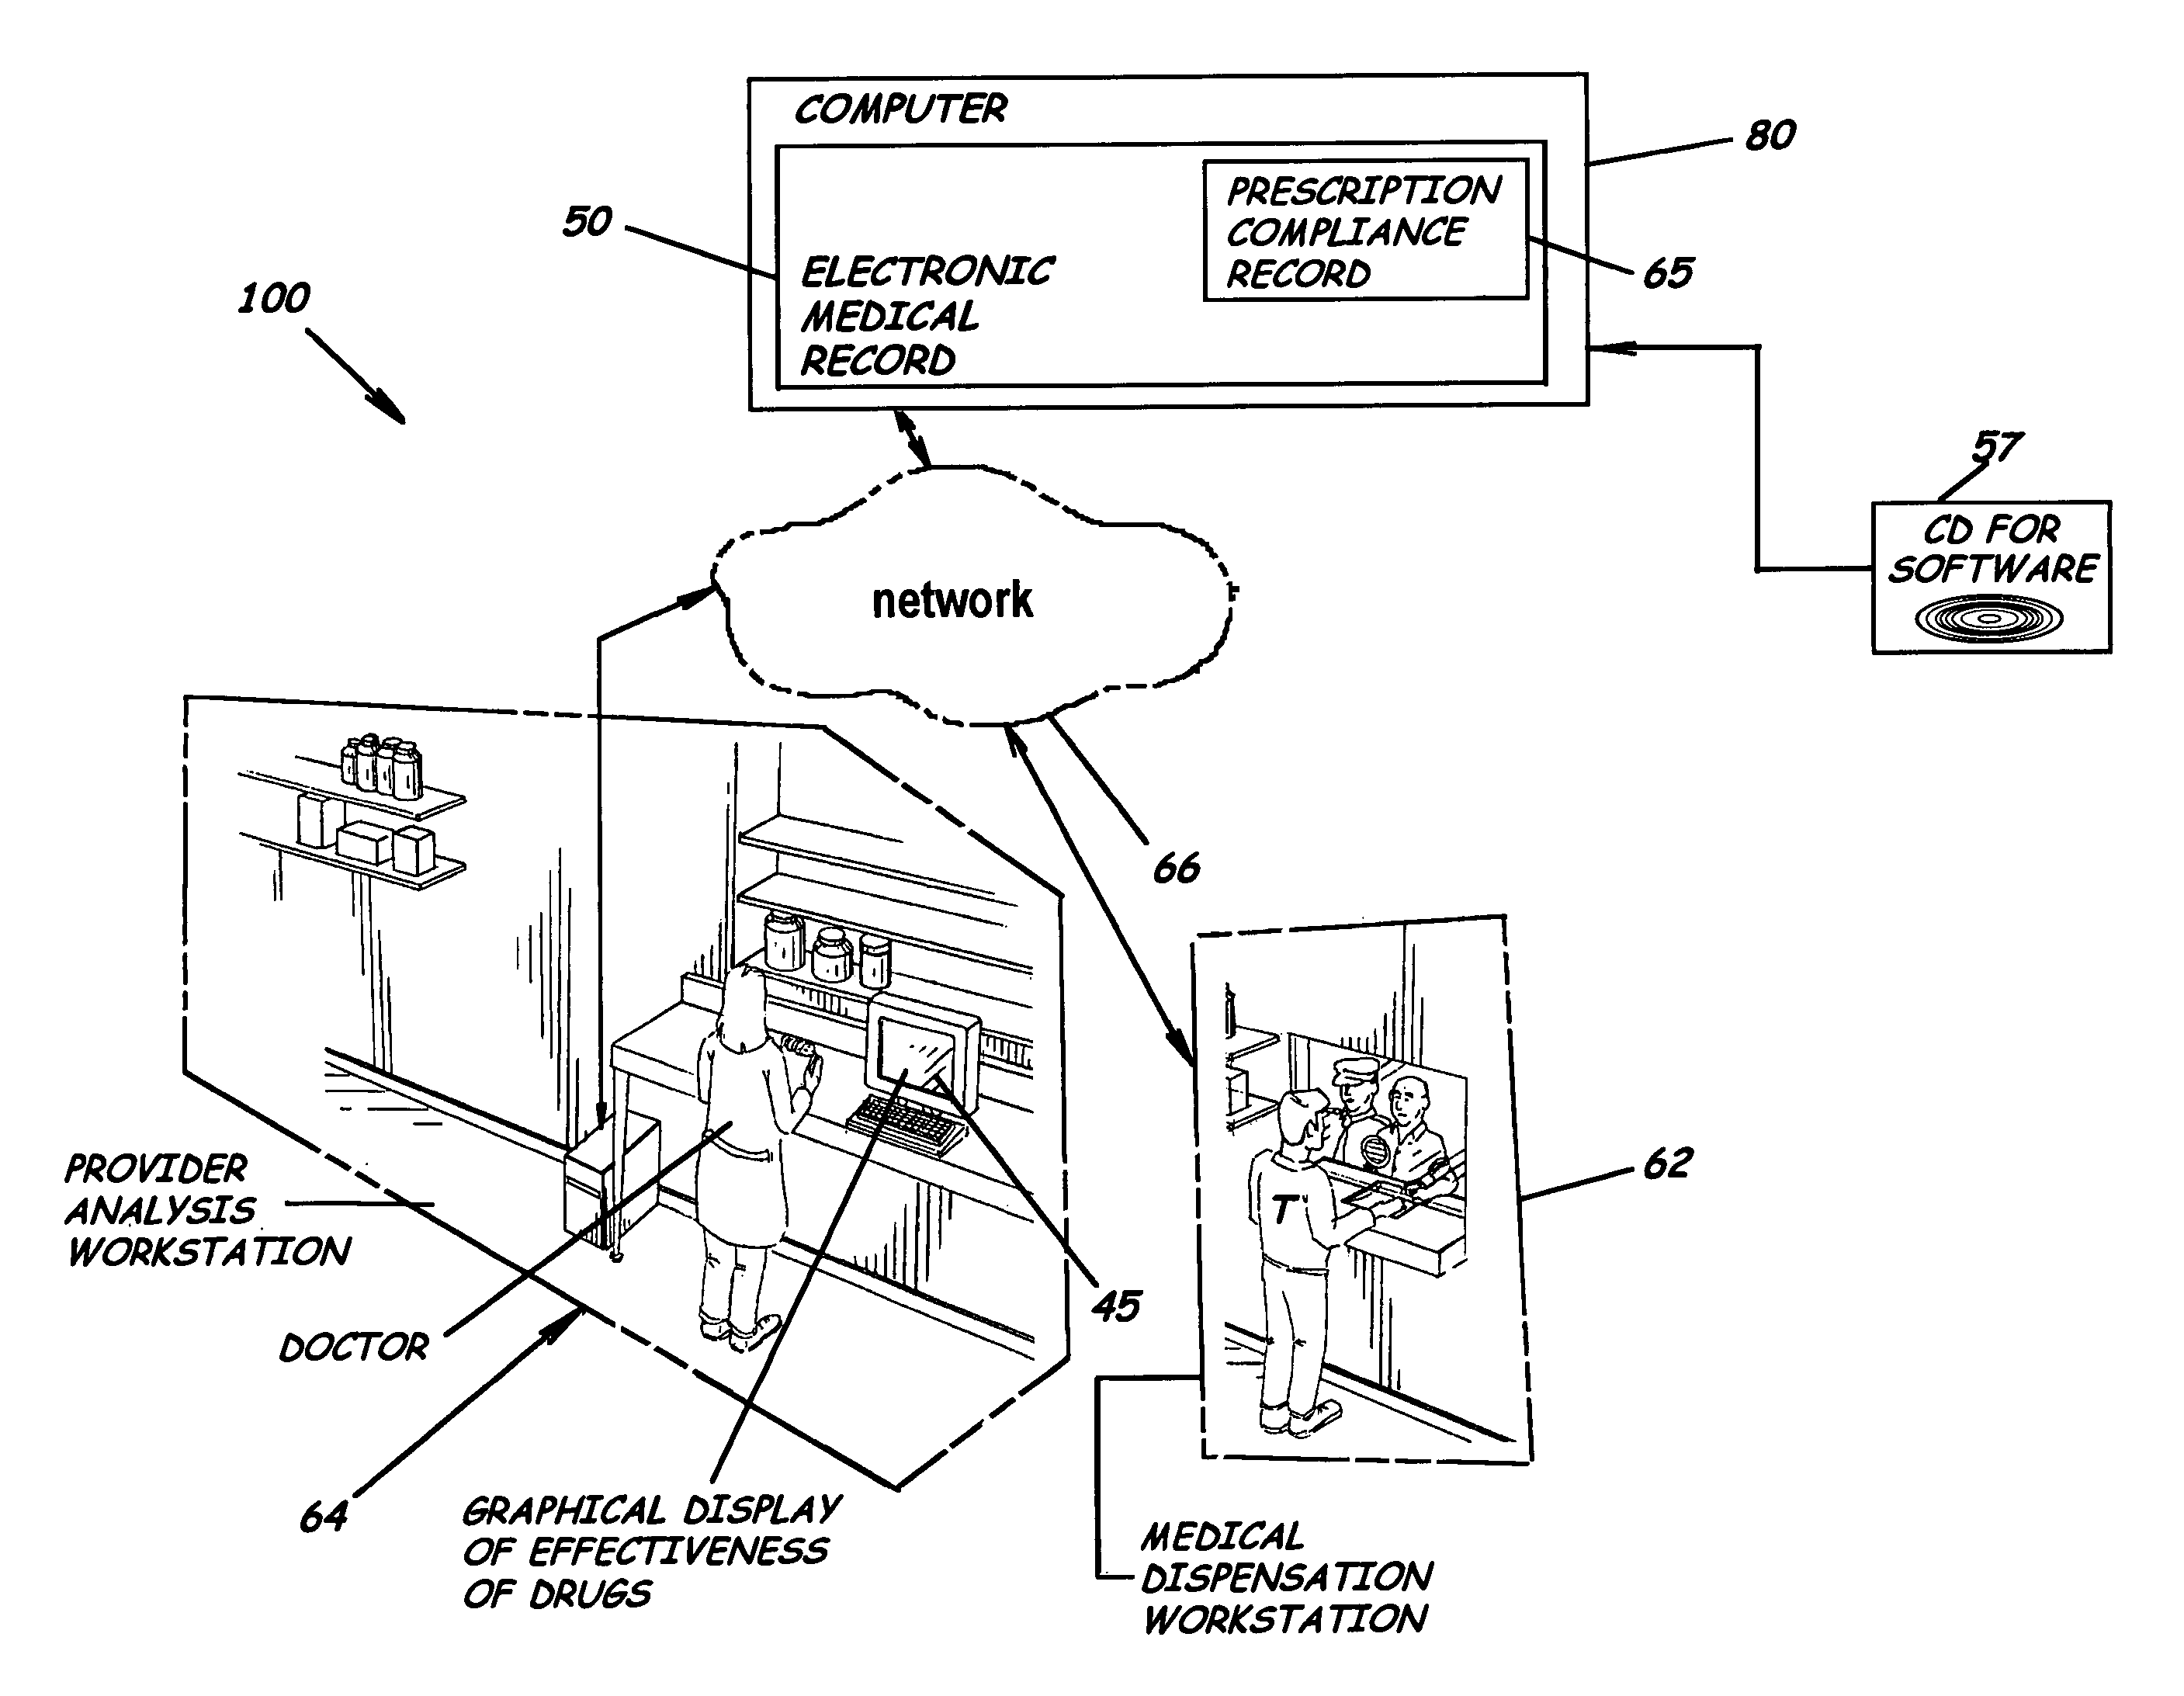 Pharmaceutical treatment effectiveness analysis computer system and methods